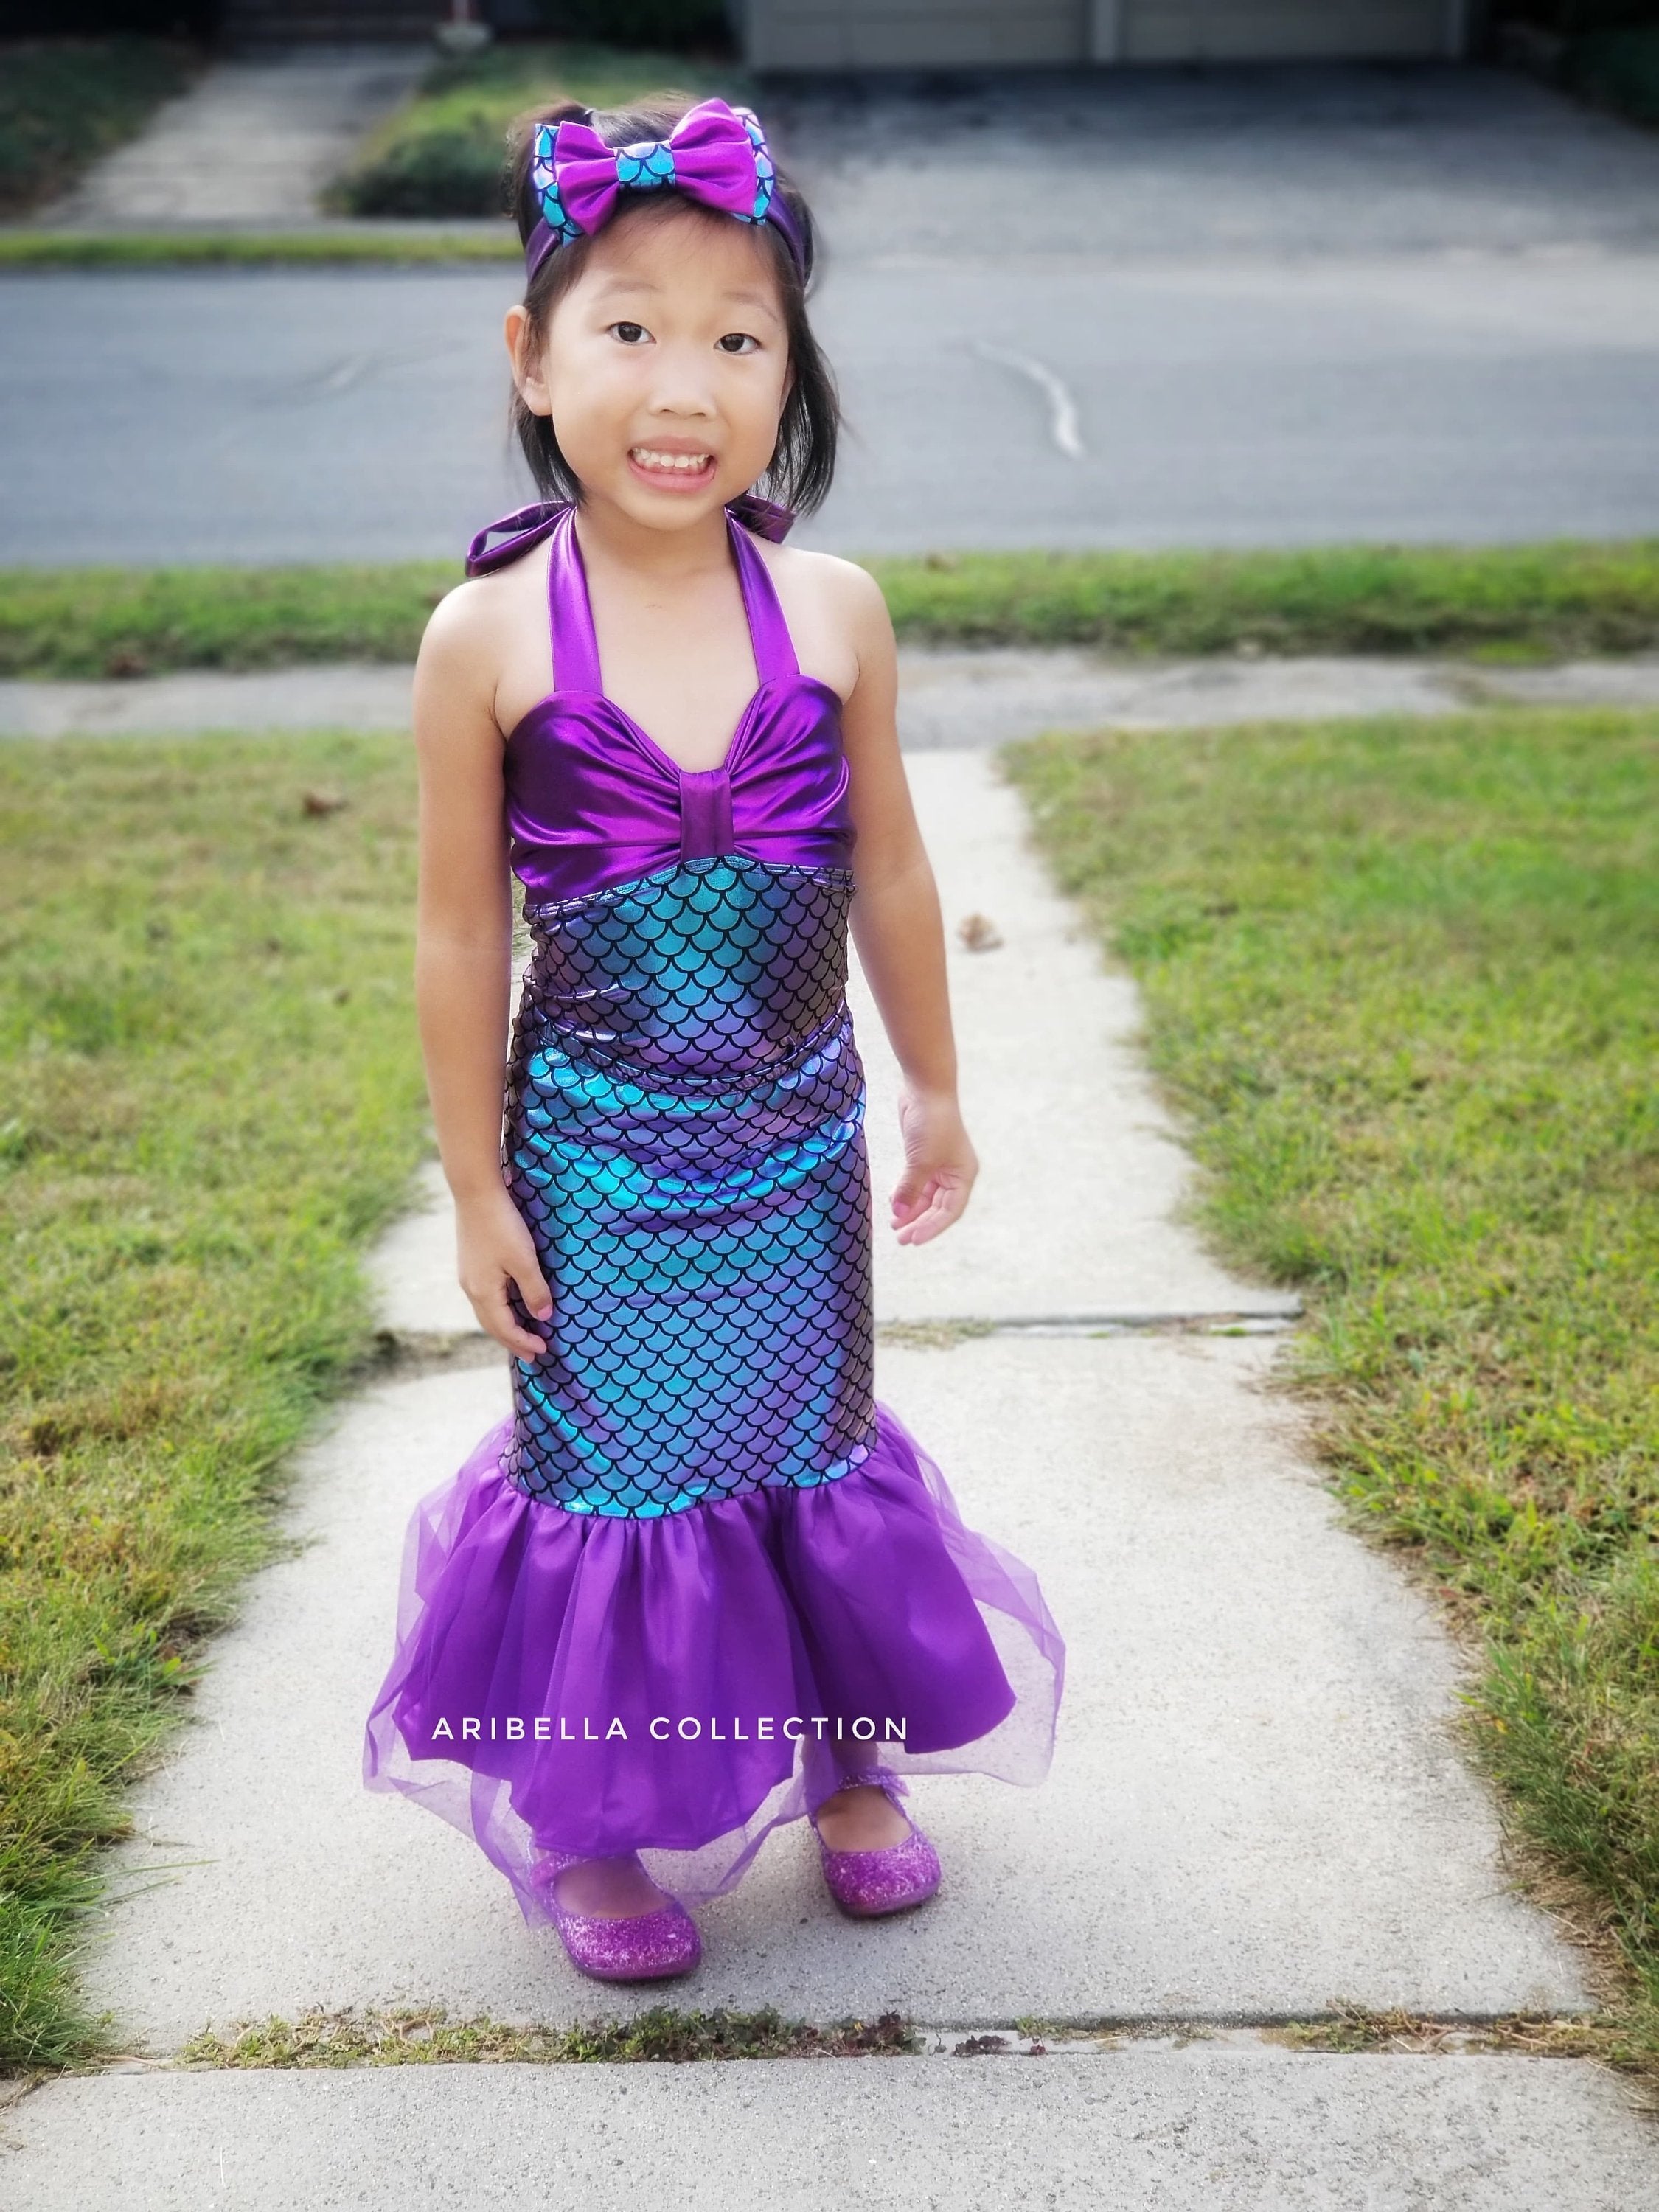 Mermaid Skirt & One Piece Swimsuit Outfit - Iridescent